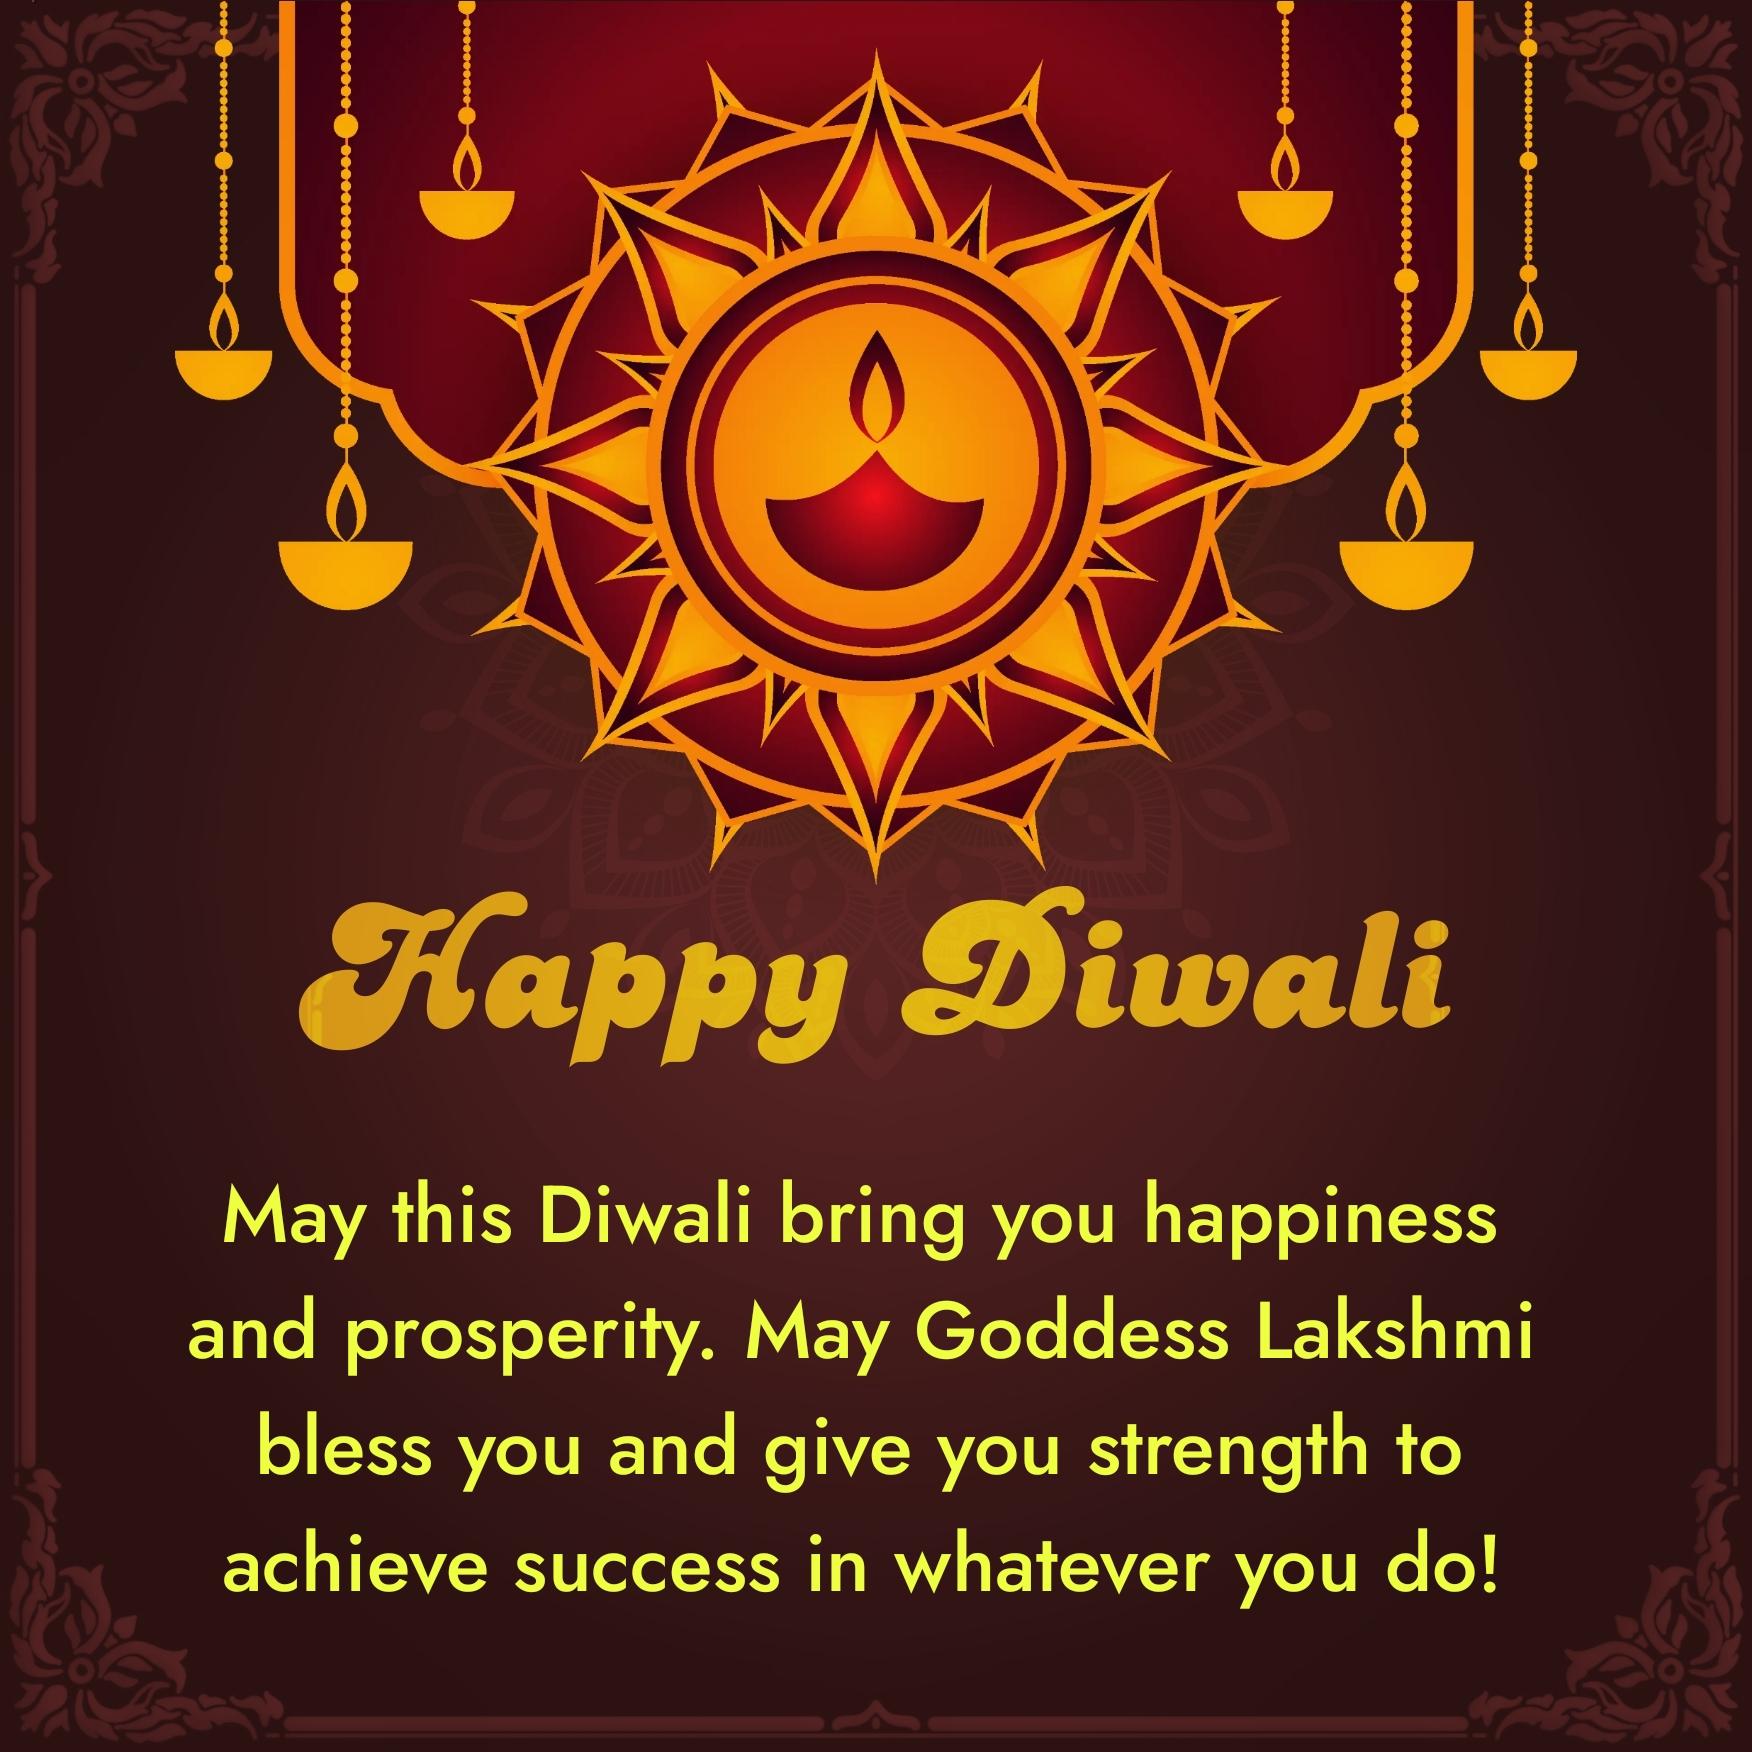 May this Diwali bring you happiness and prosperity